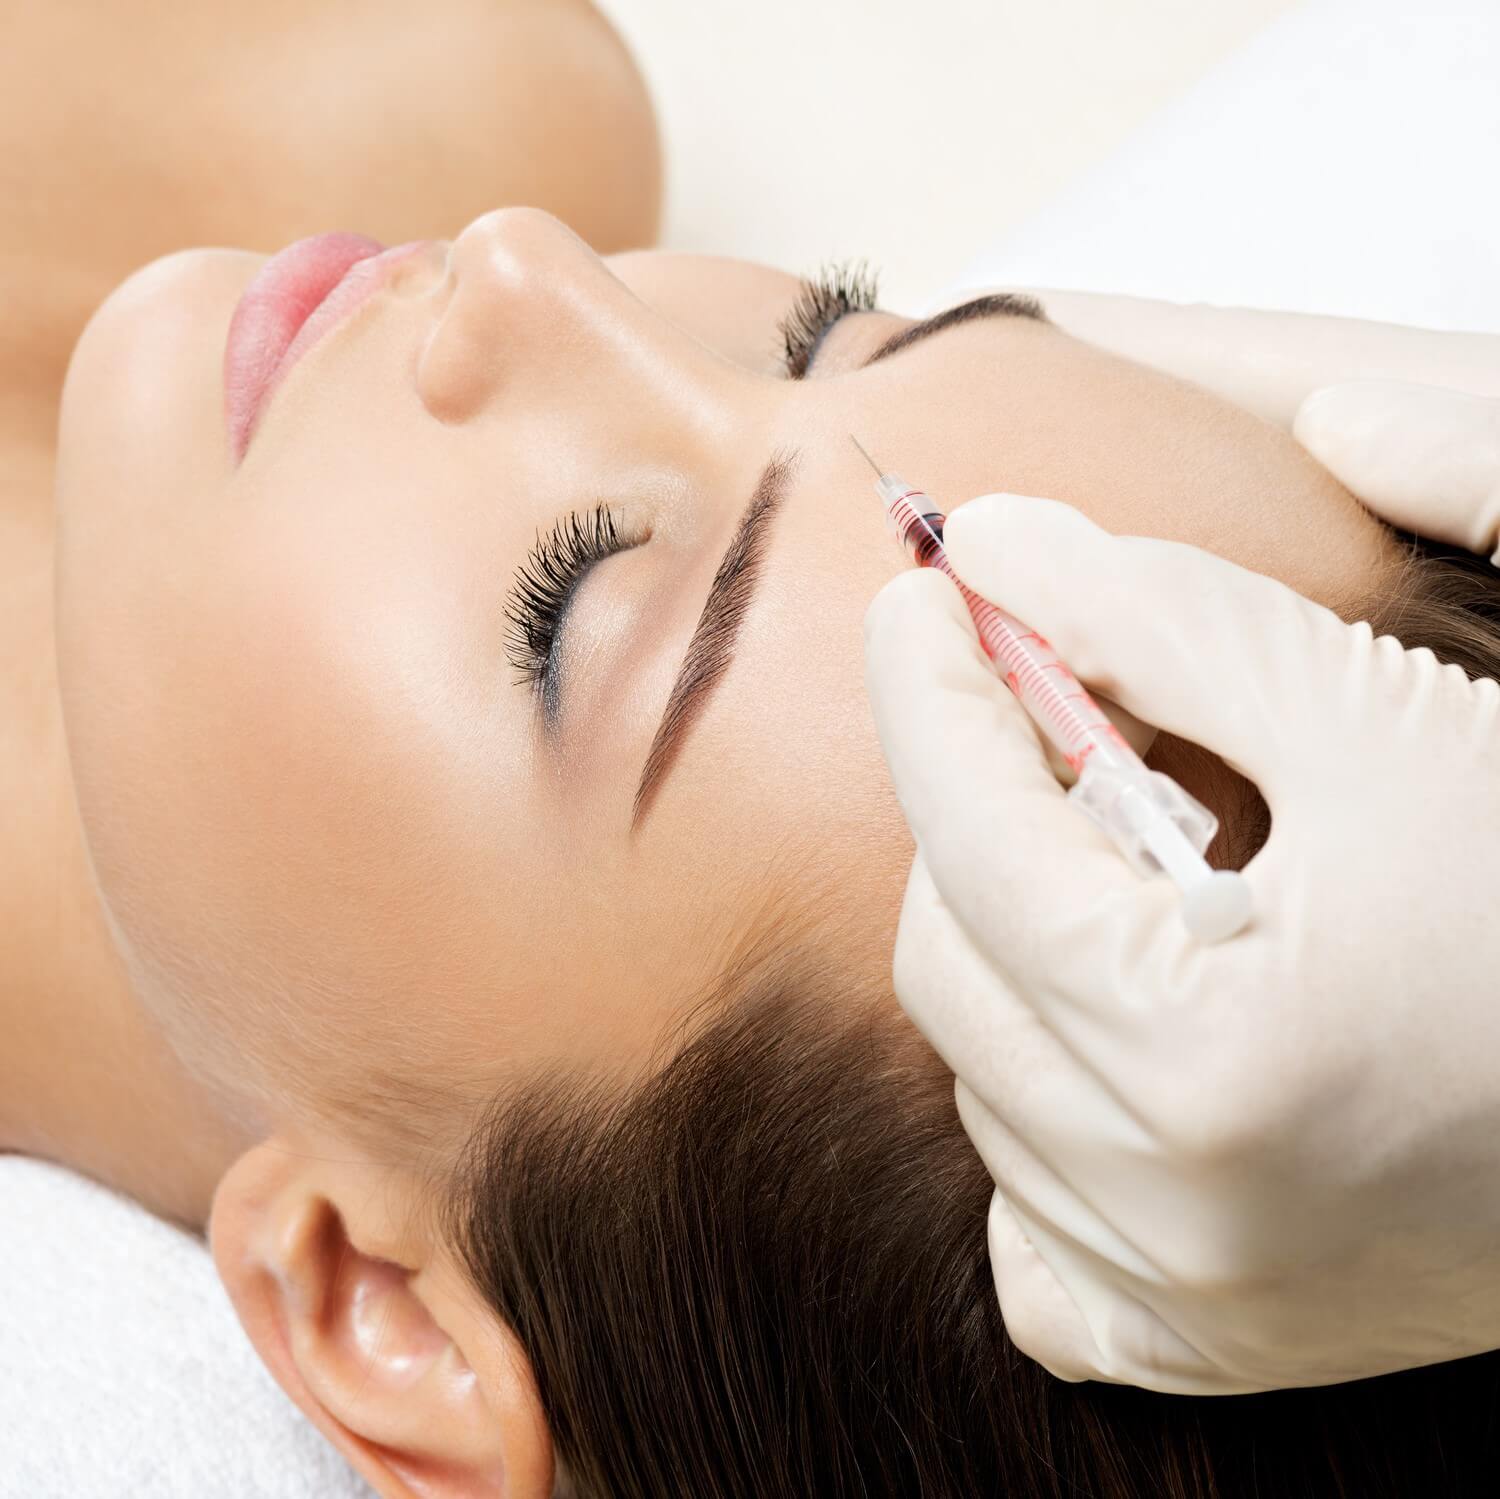 Can You Really Become Immune to Botox?